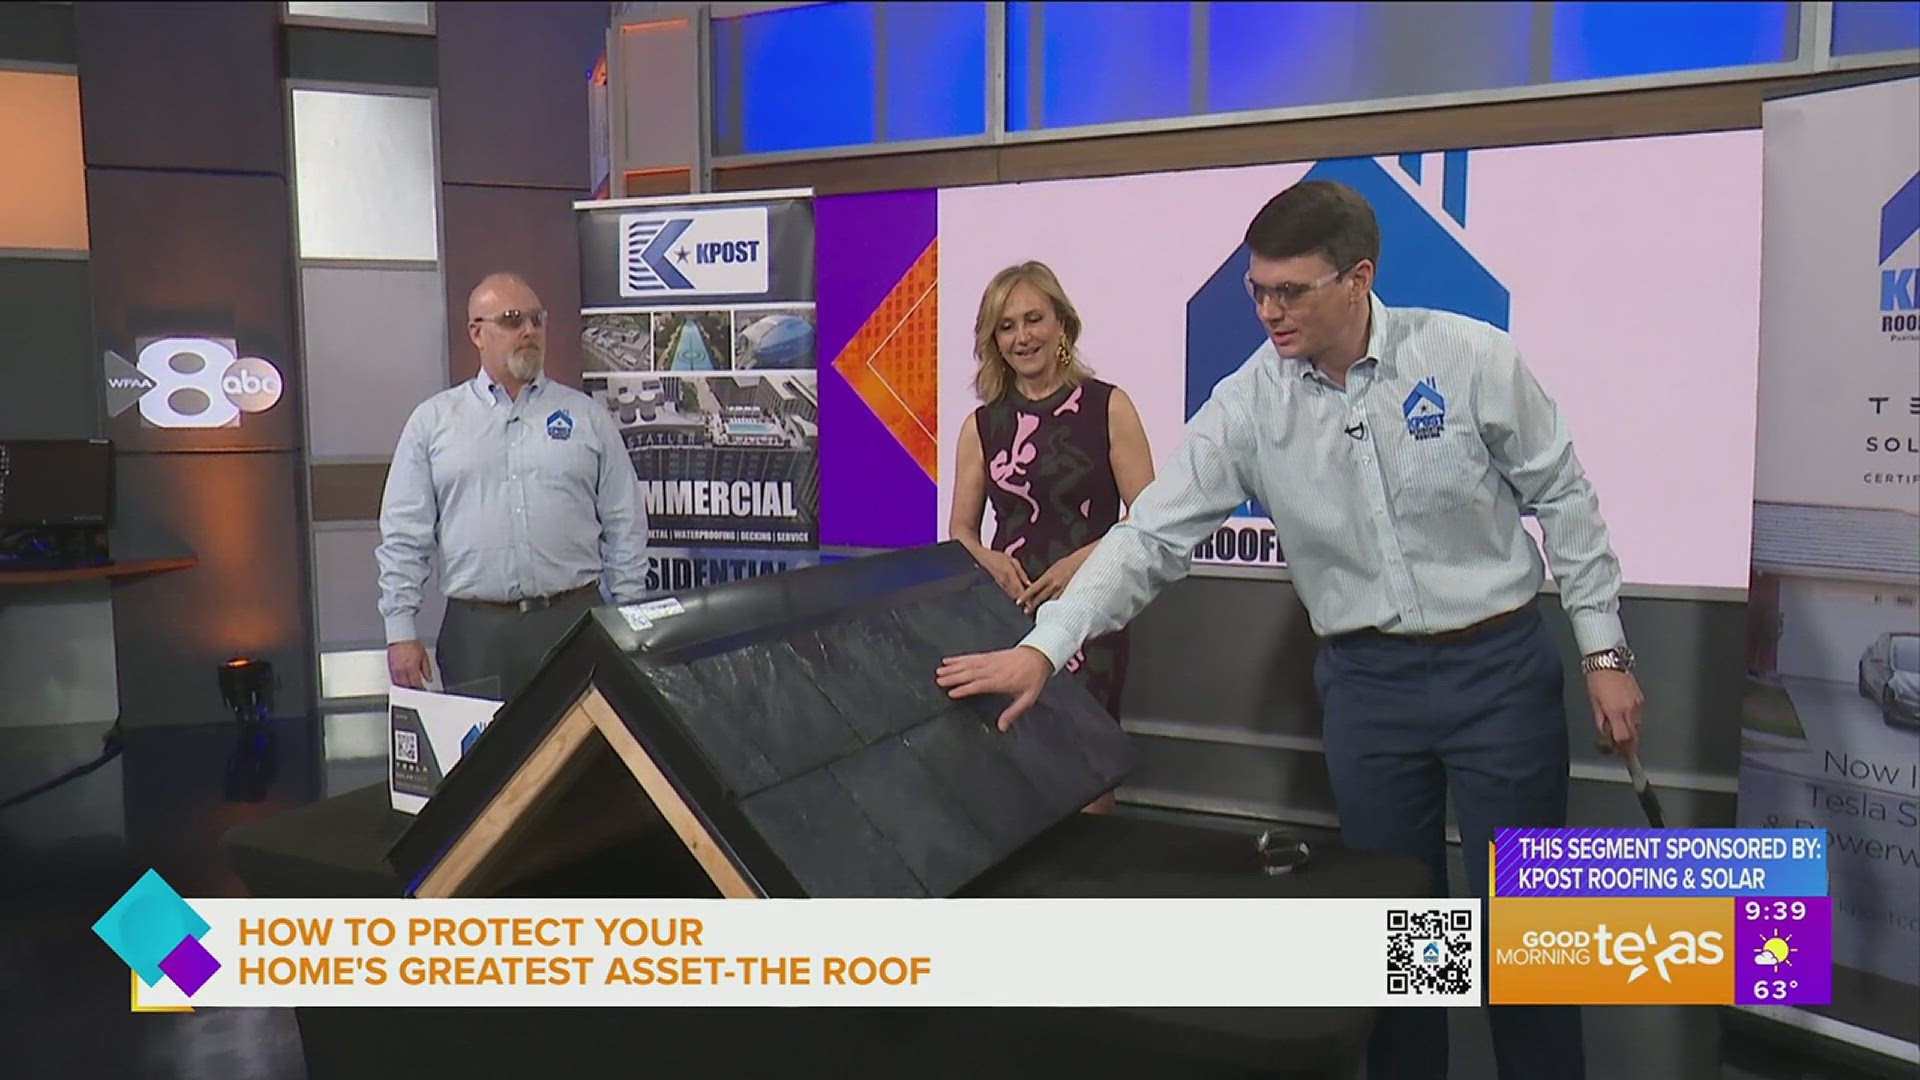 This segment is sponsored by: KPost Roofing & Solar